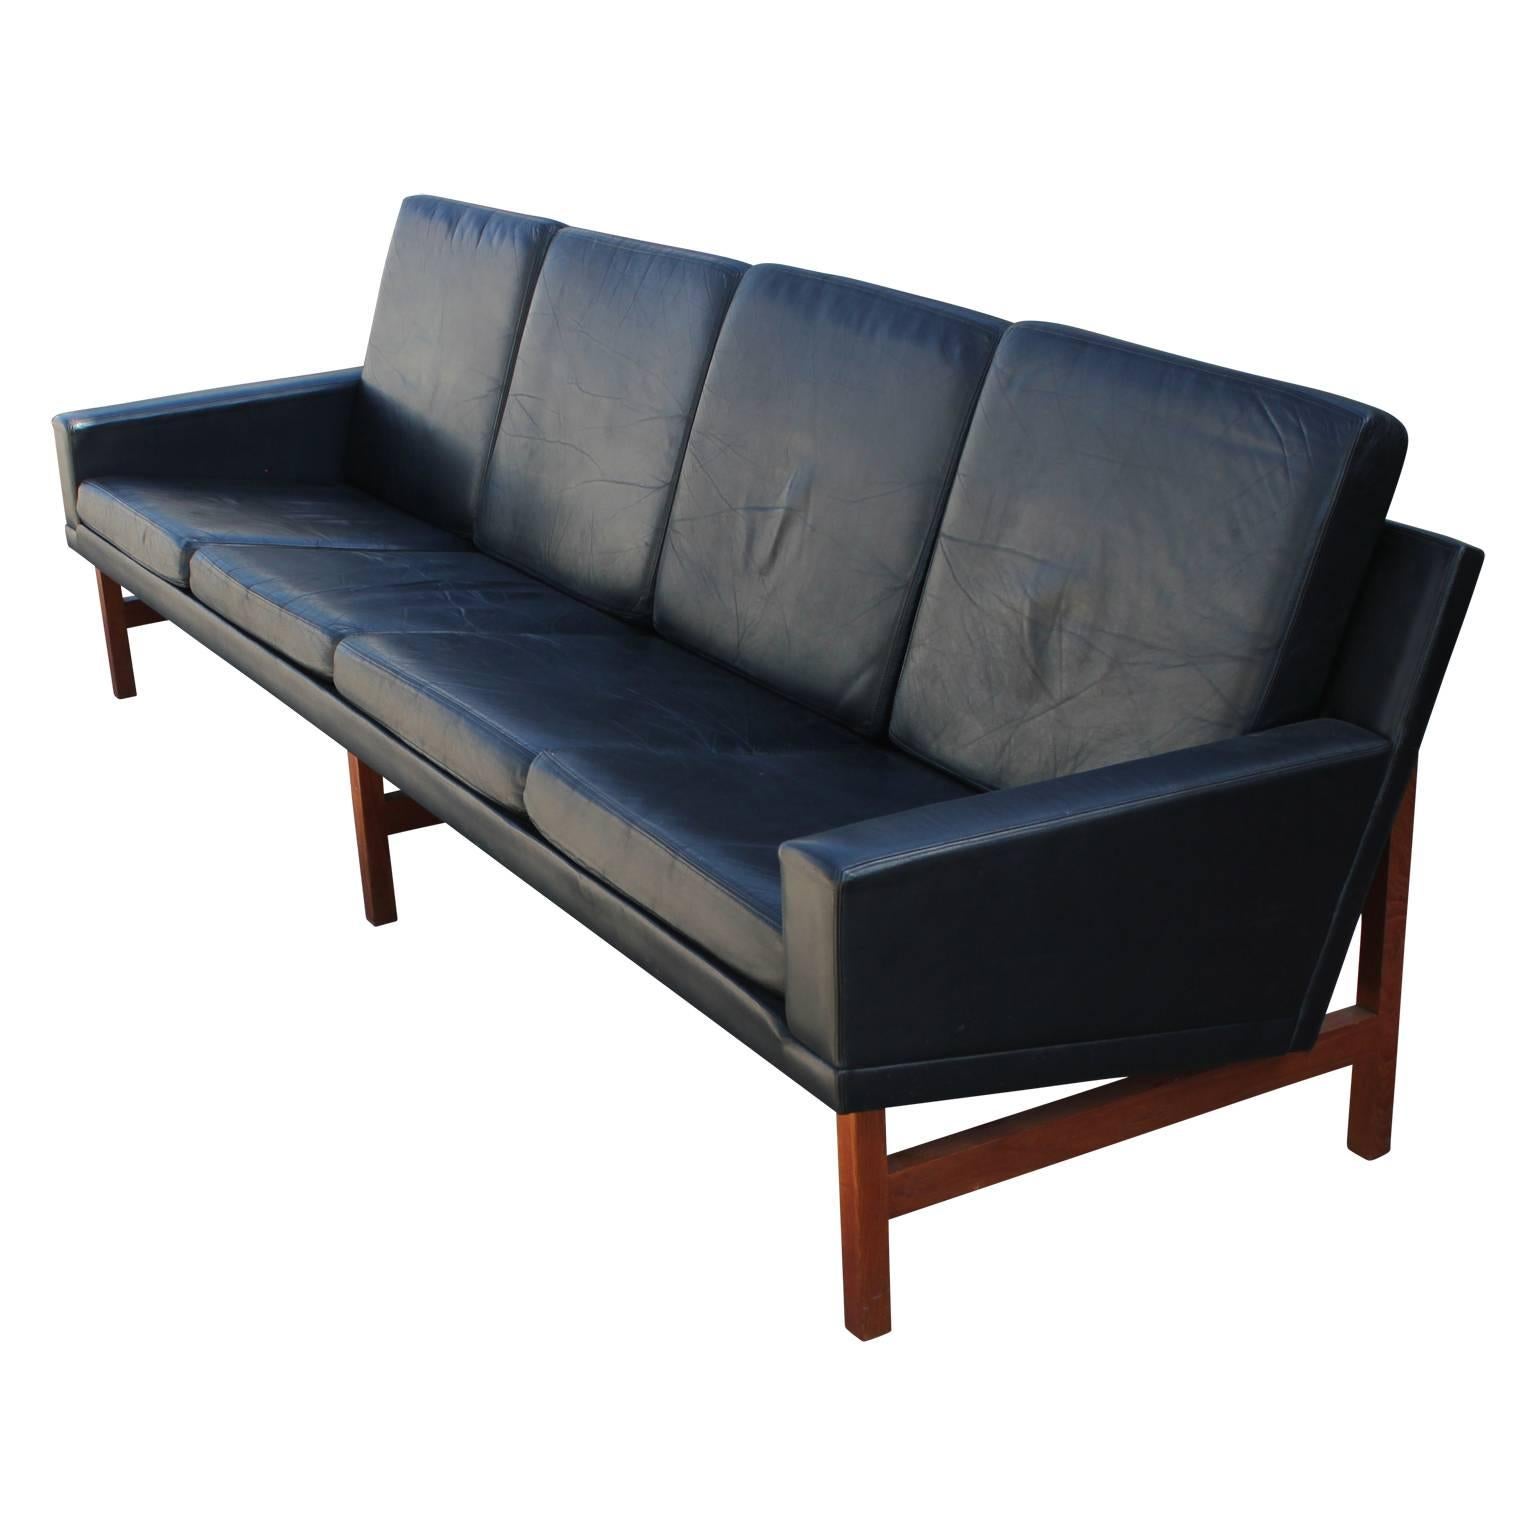 Gorgeous modernist black leather sofa in the style of Hans J. Wegner. Absolutely stunning.